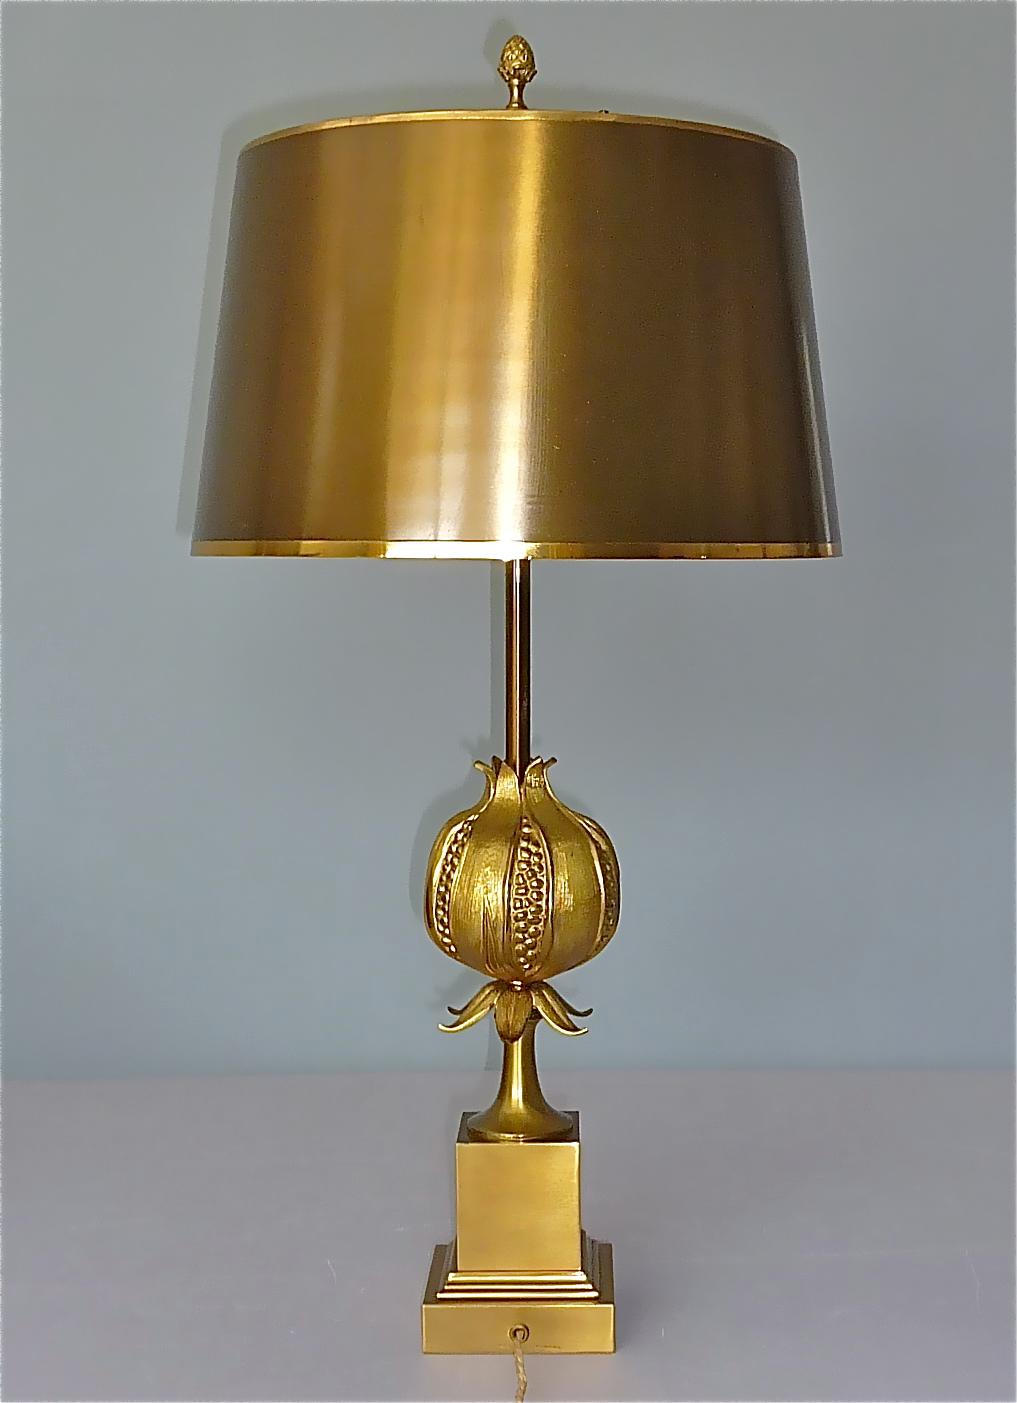 Rare Signed Gilt Bronze French Table Lamp Maison Charles Pomgranate 1970s Jansen For Sale 4